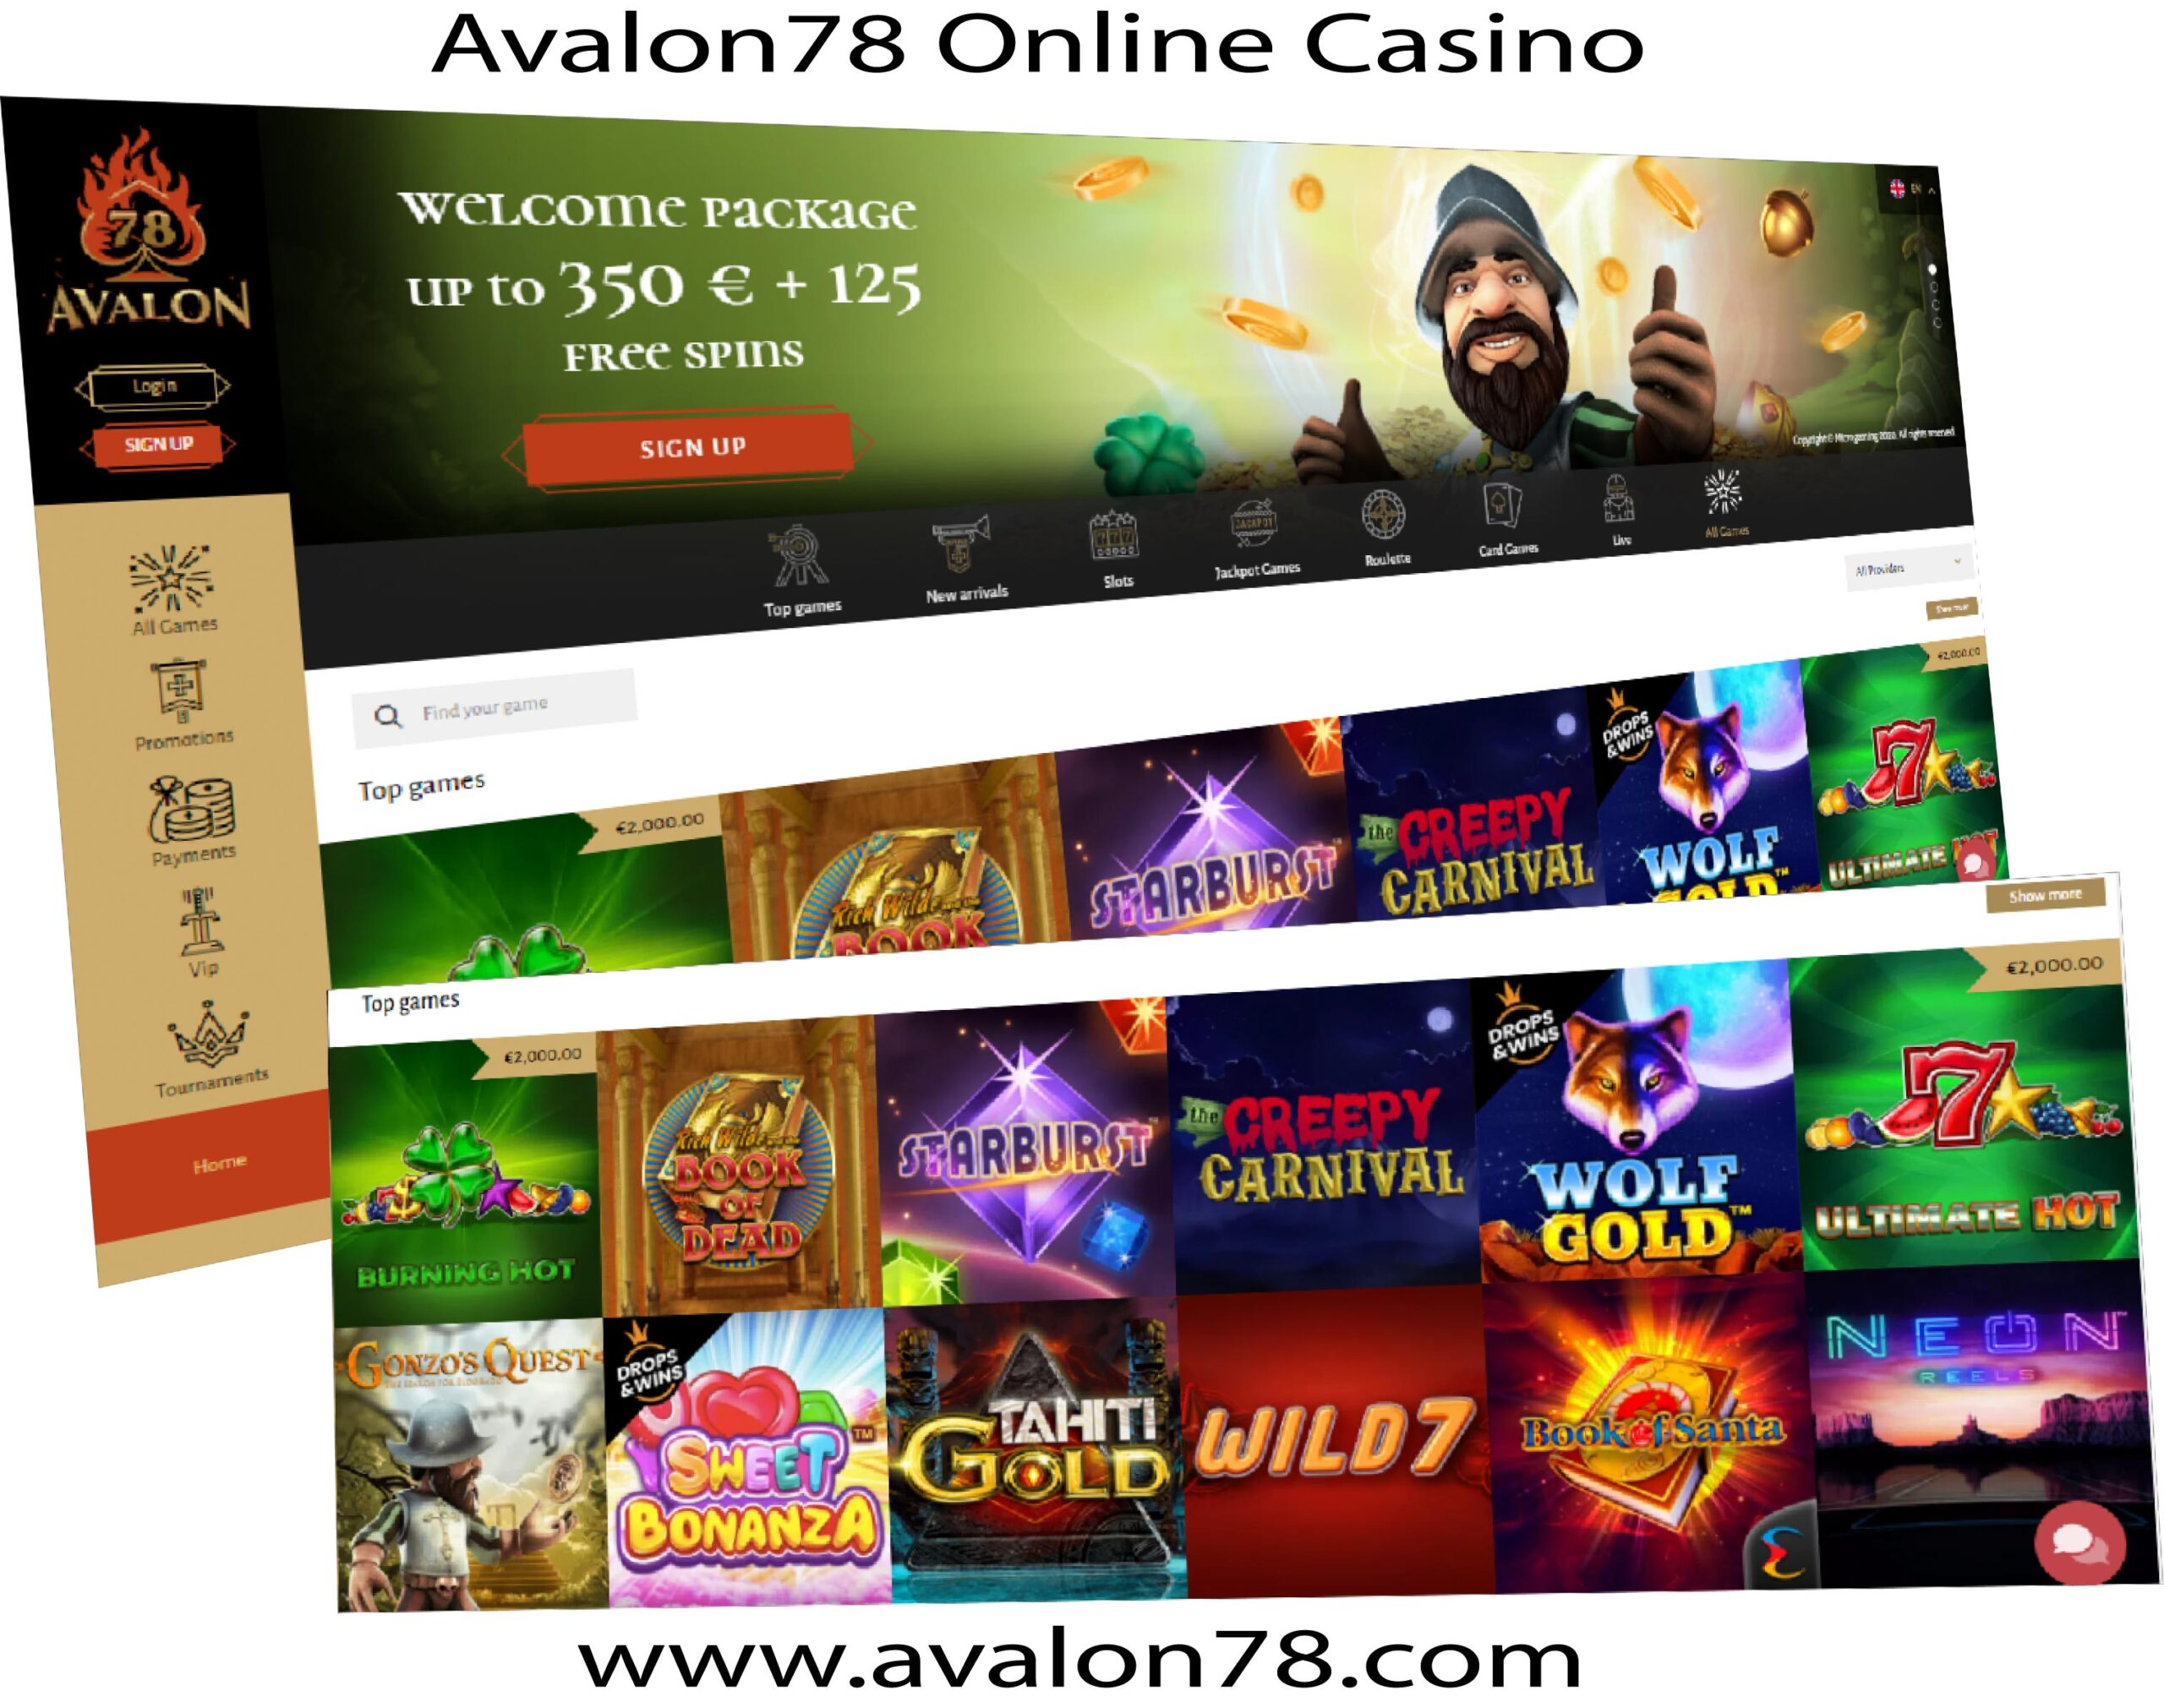 Online Casino Games at Avalon